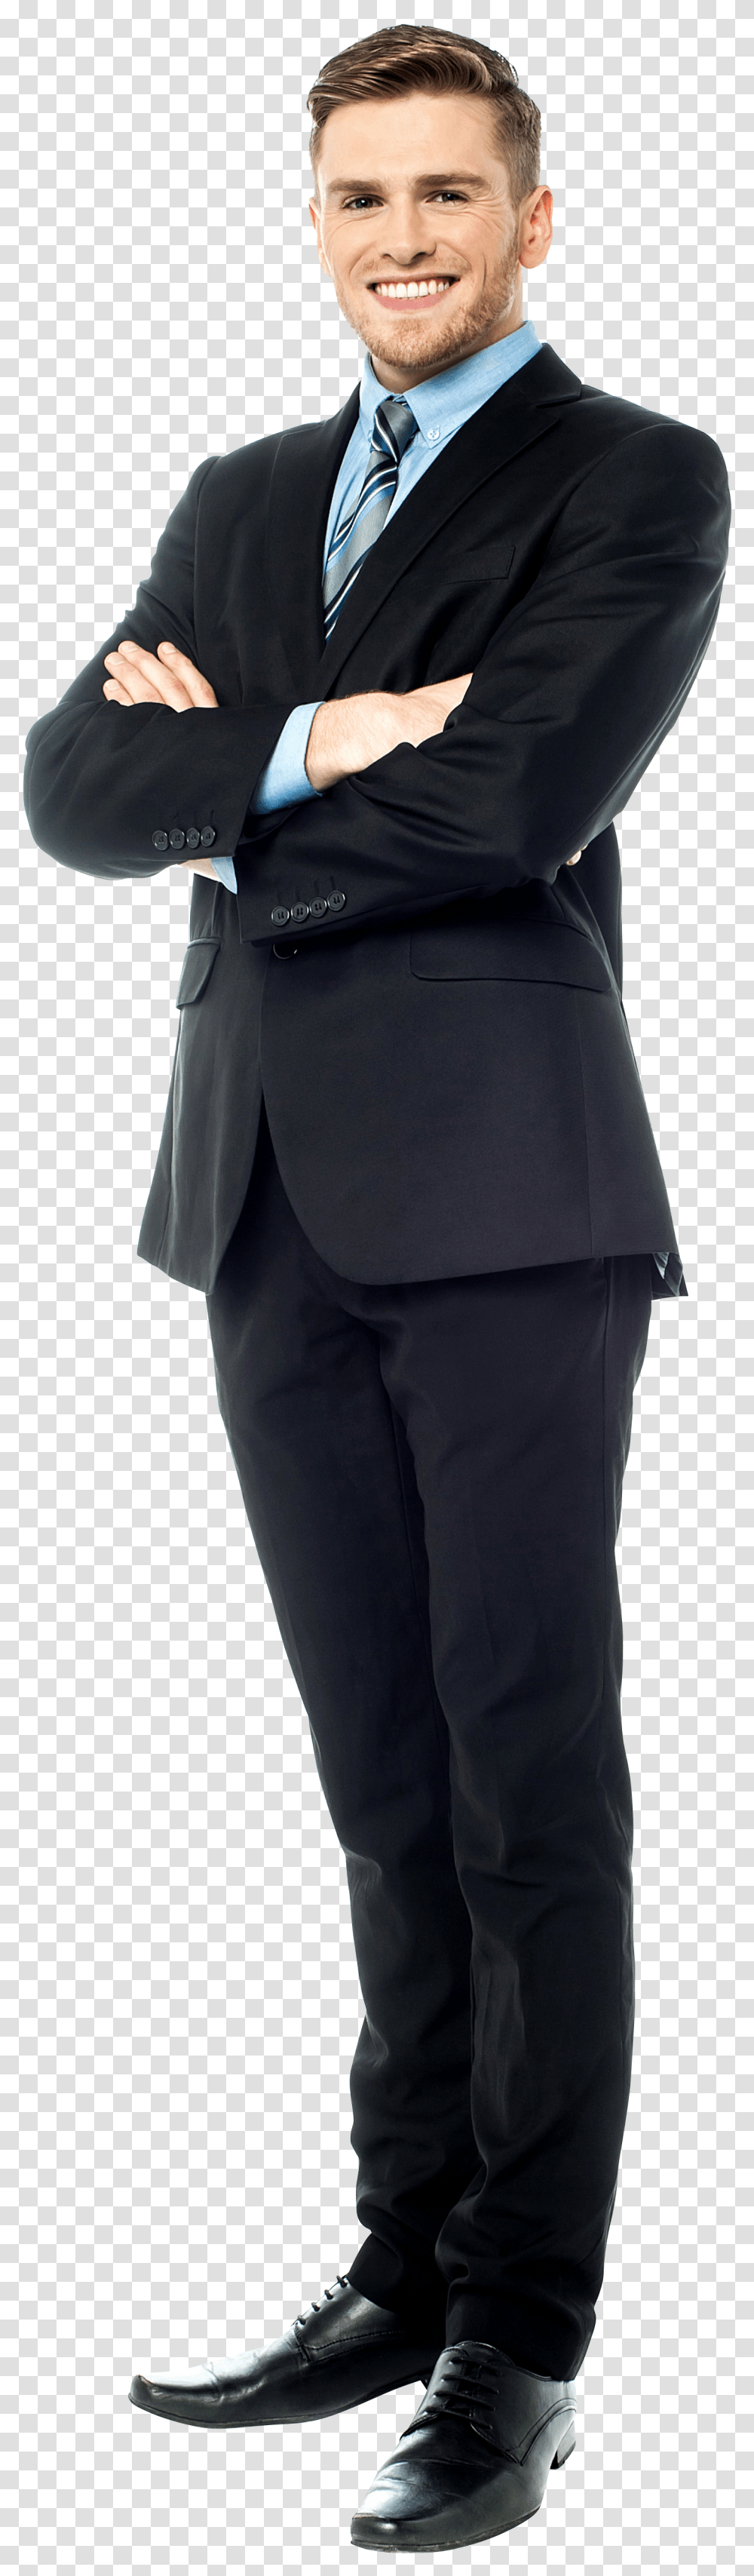 Man In A Suit Amp Free Man In A Suit Man With Suit Transparent Png